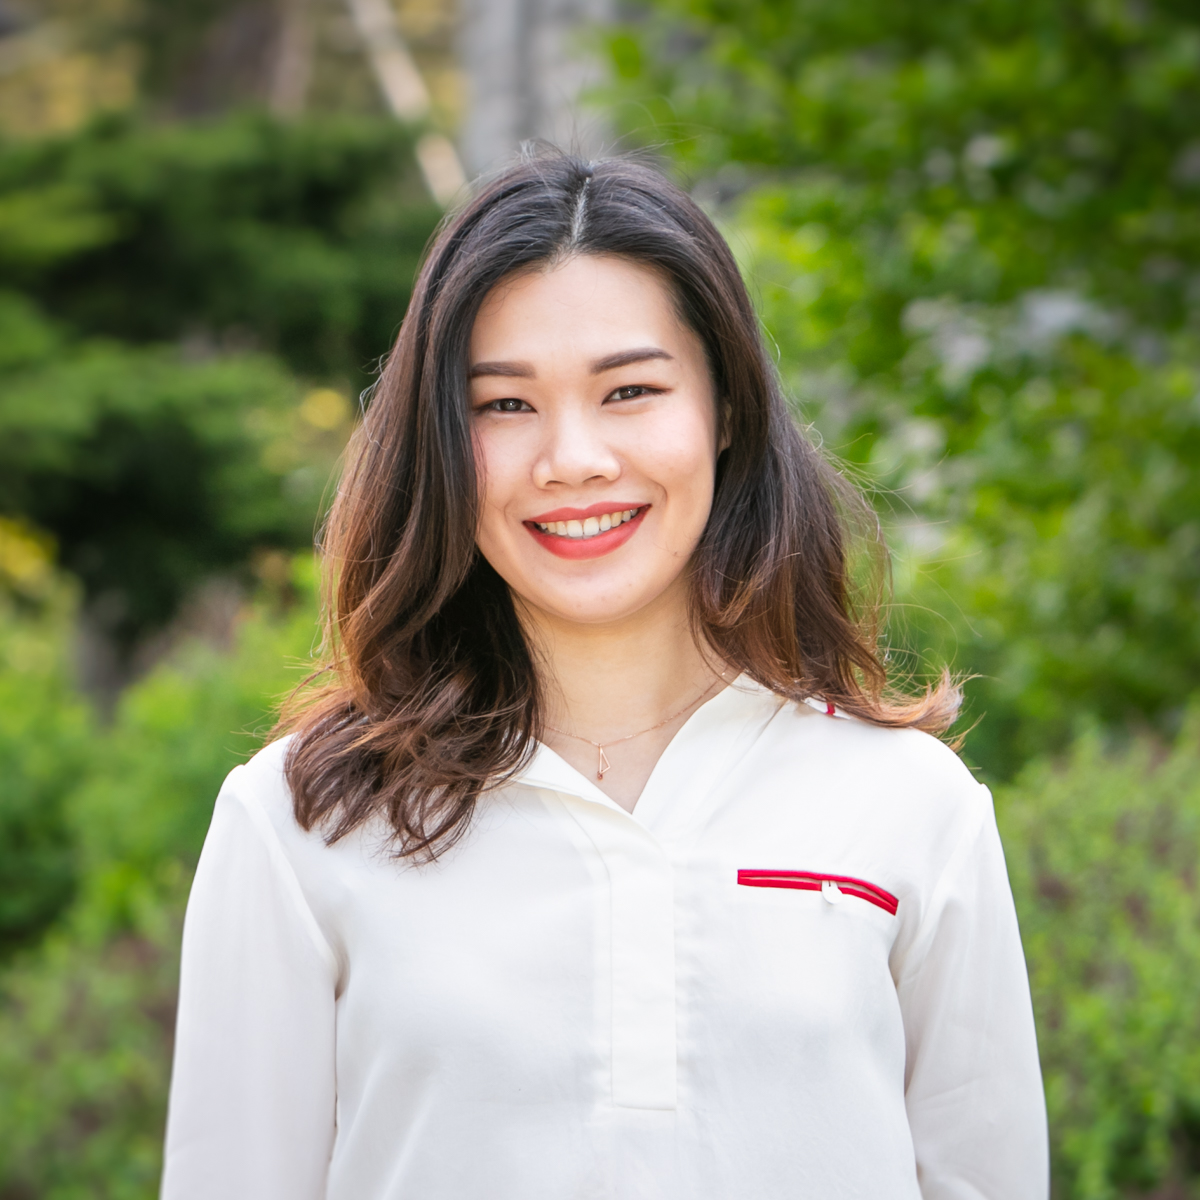 Tourism and Hospitality MSc at the University of Guelph graduate student Xiaoyan Yang